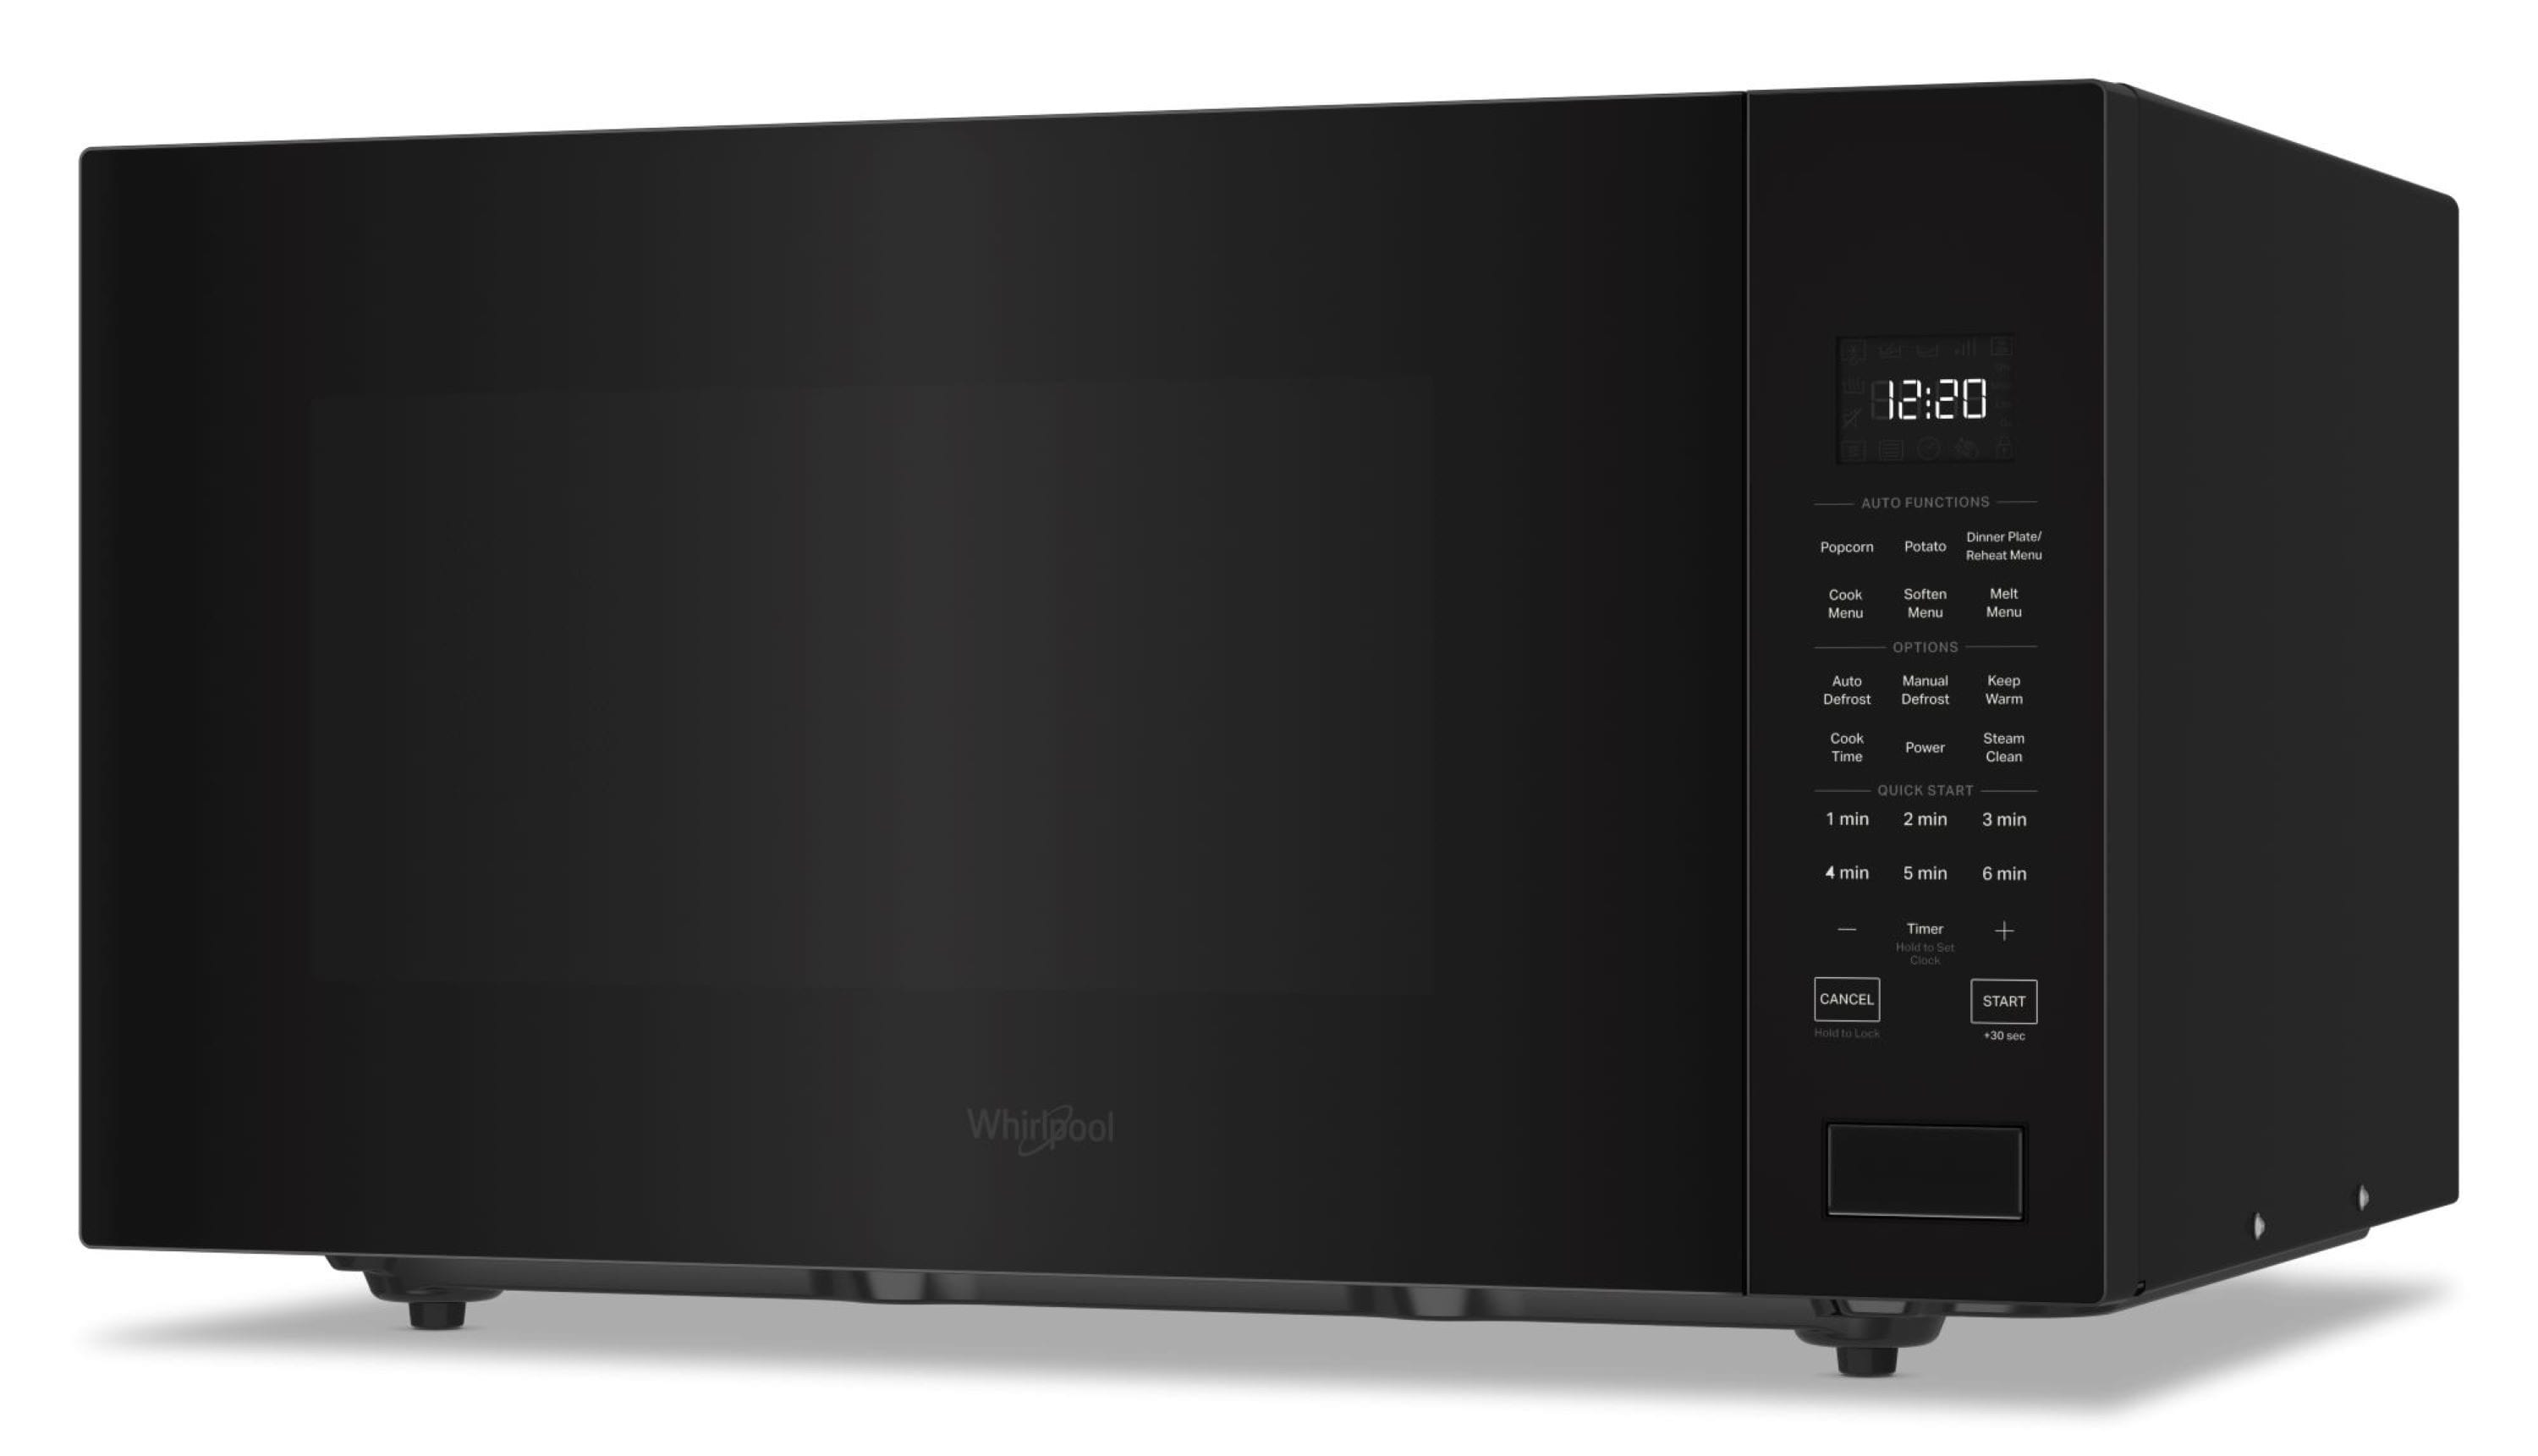 Whirlpool WMC50522AS Microwave review: Nothing special, but it